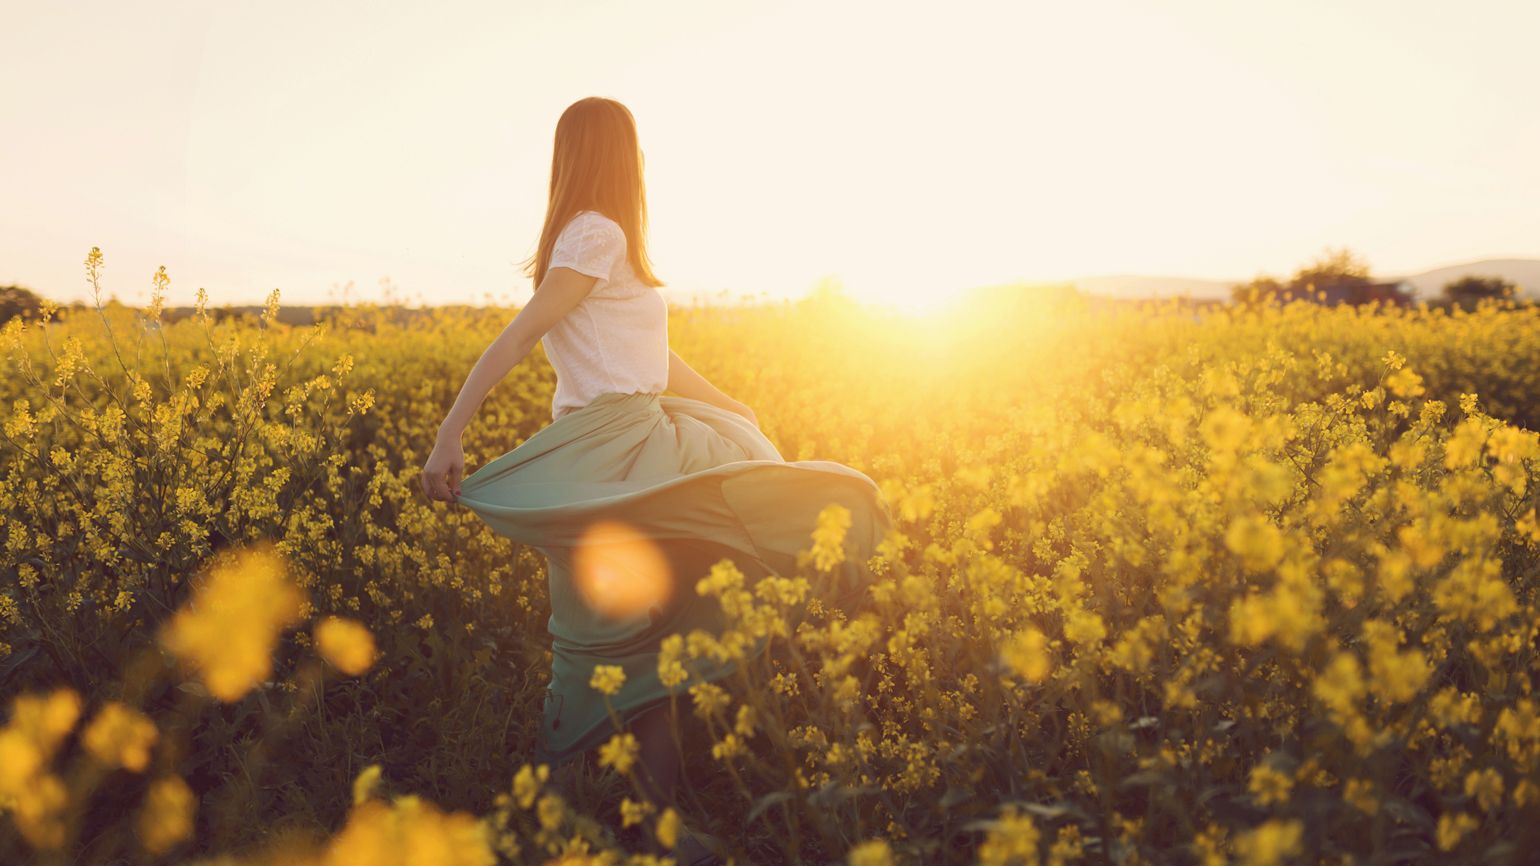 A woman dancing through a field of yellow flowers.